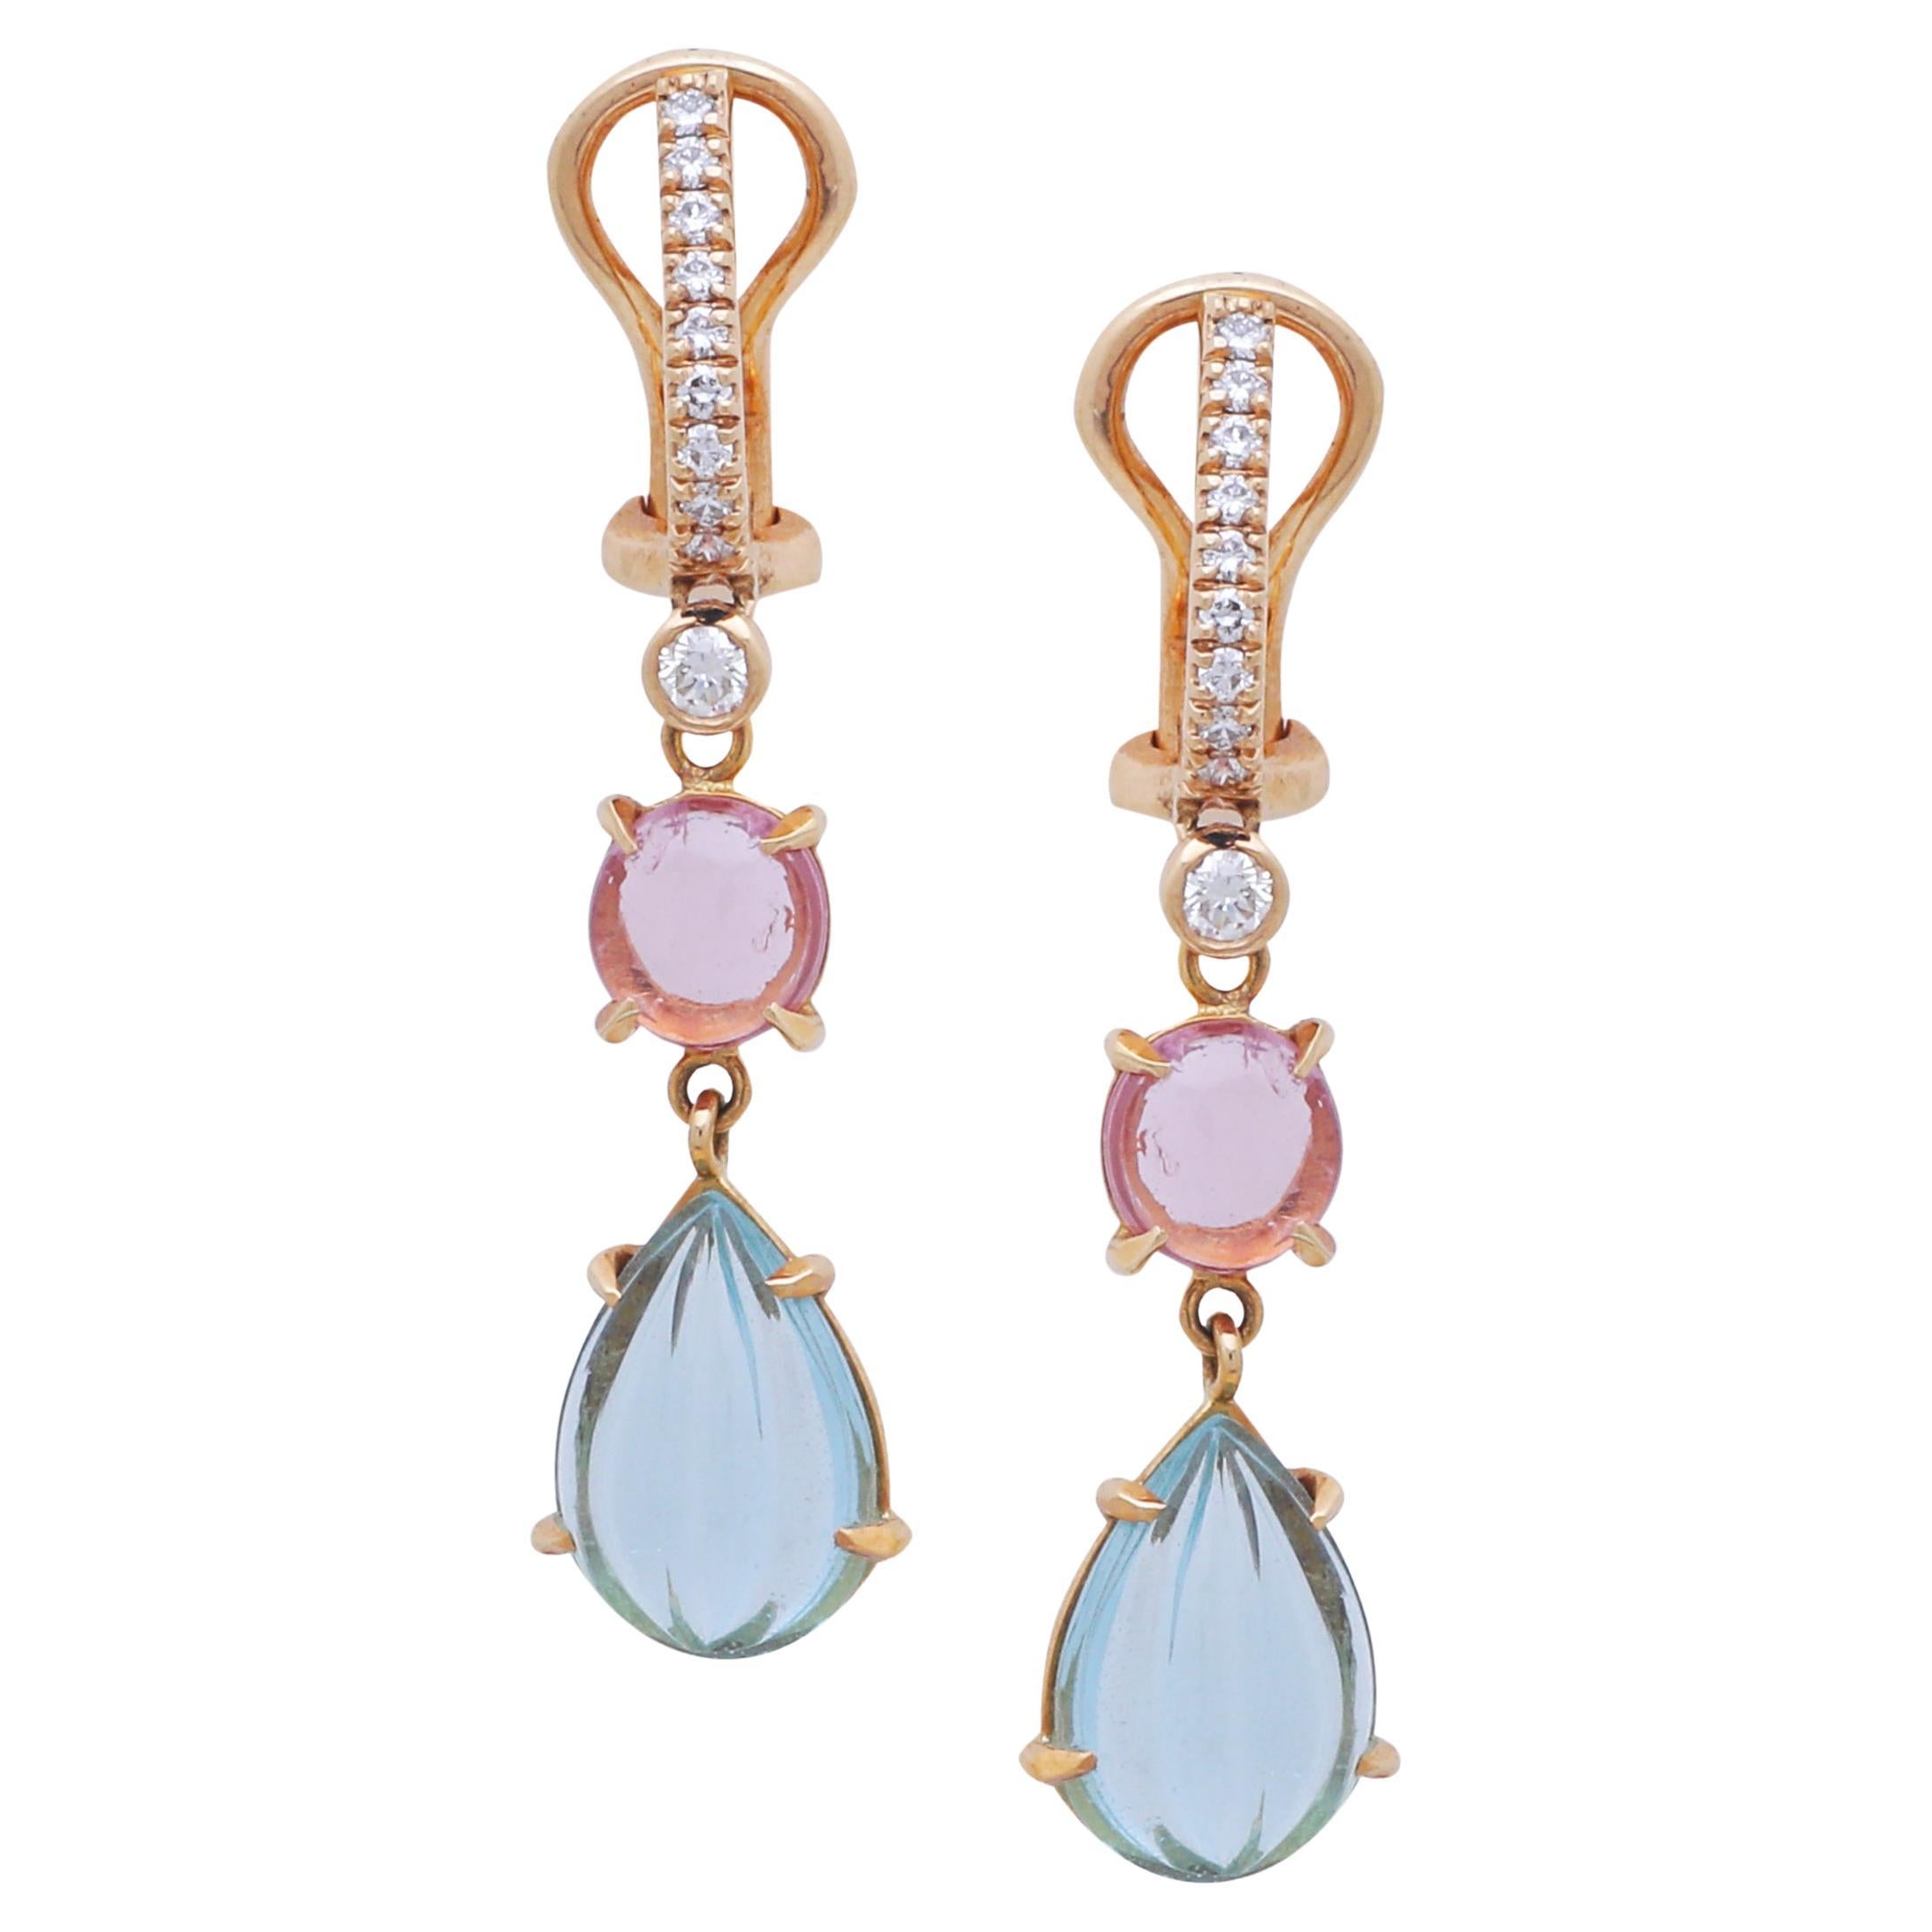 Aquamarine Carved and Spinel Cabochon Earrings in 18k Gold with Diamonds